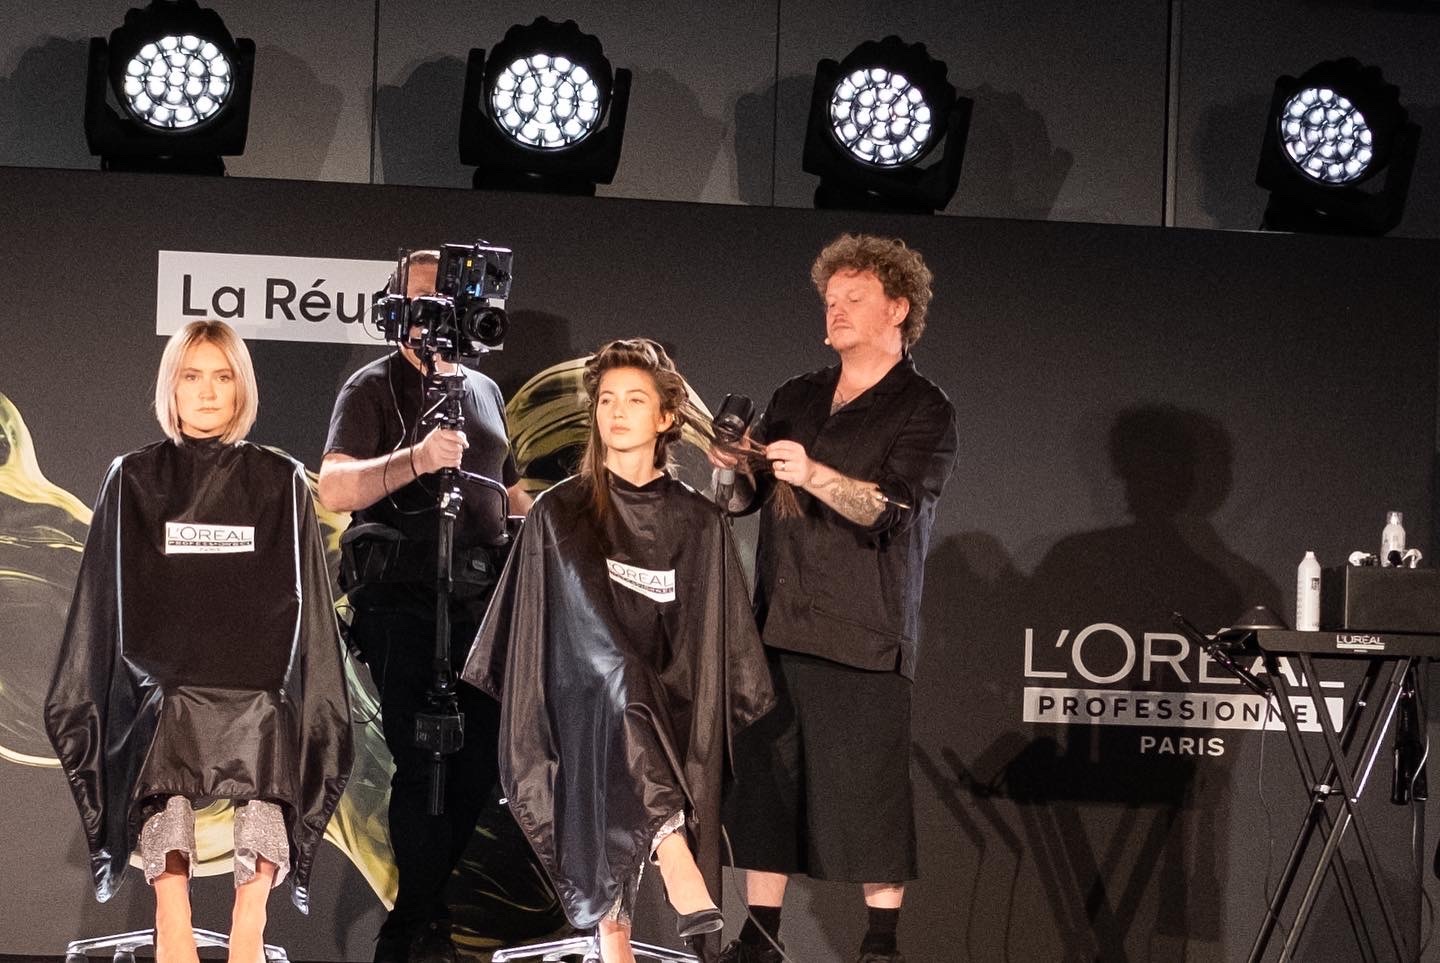 Richard Phillipart, owner of The Boutique Atelier in Ellesmere Port, has been on tour across Europe, wowing audiences with his hairdressing skills.